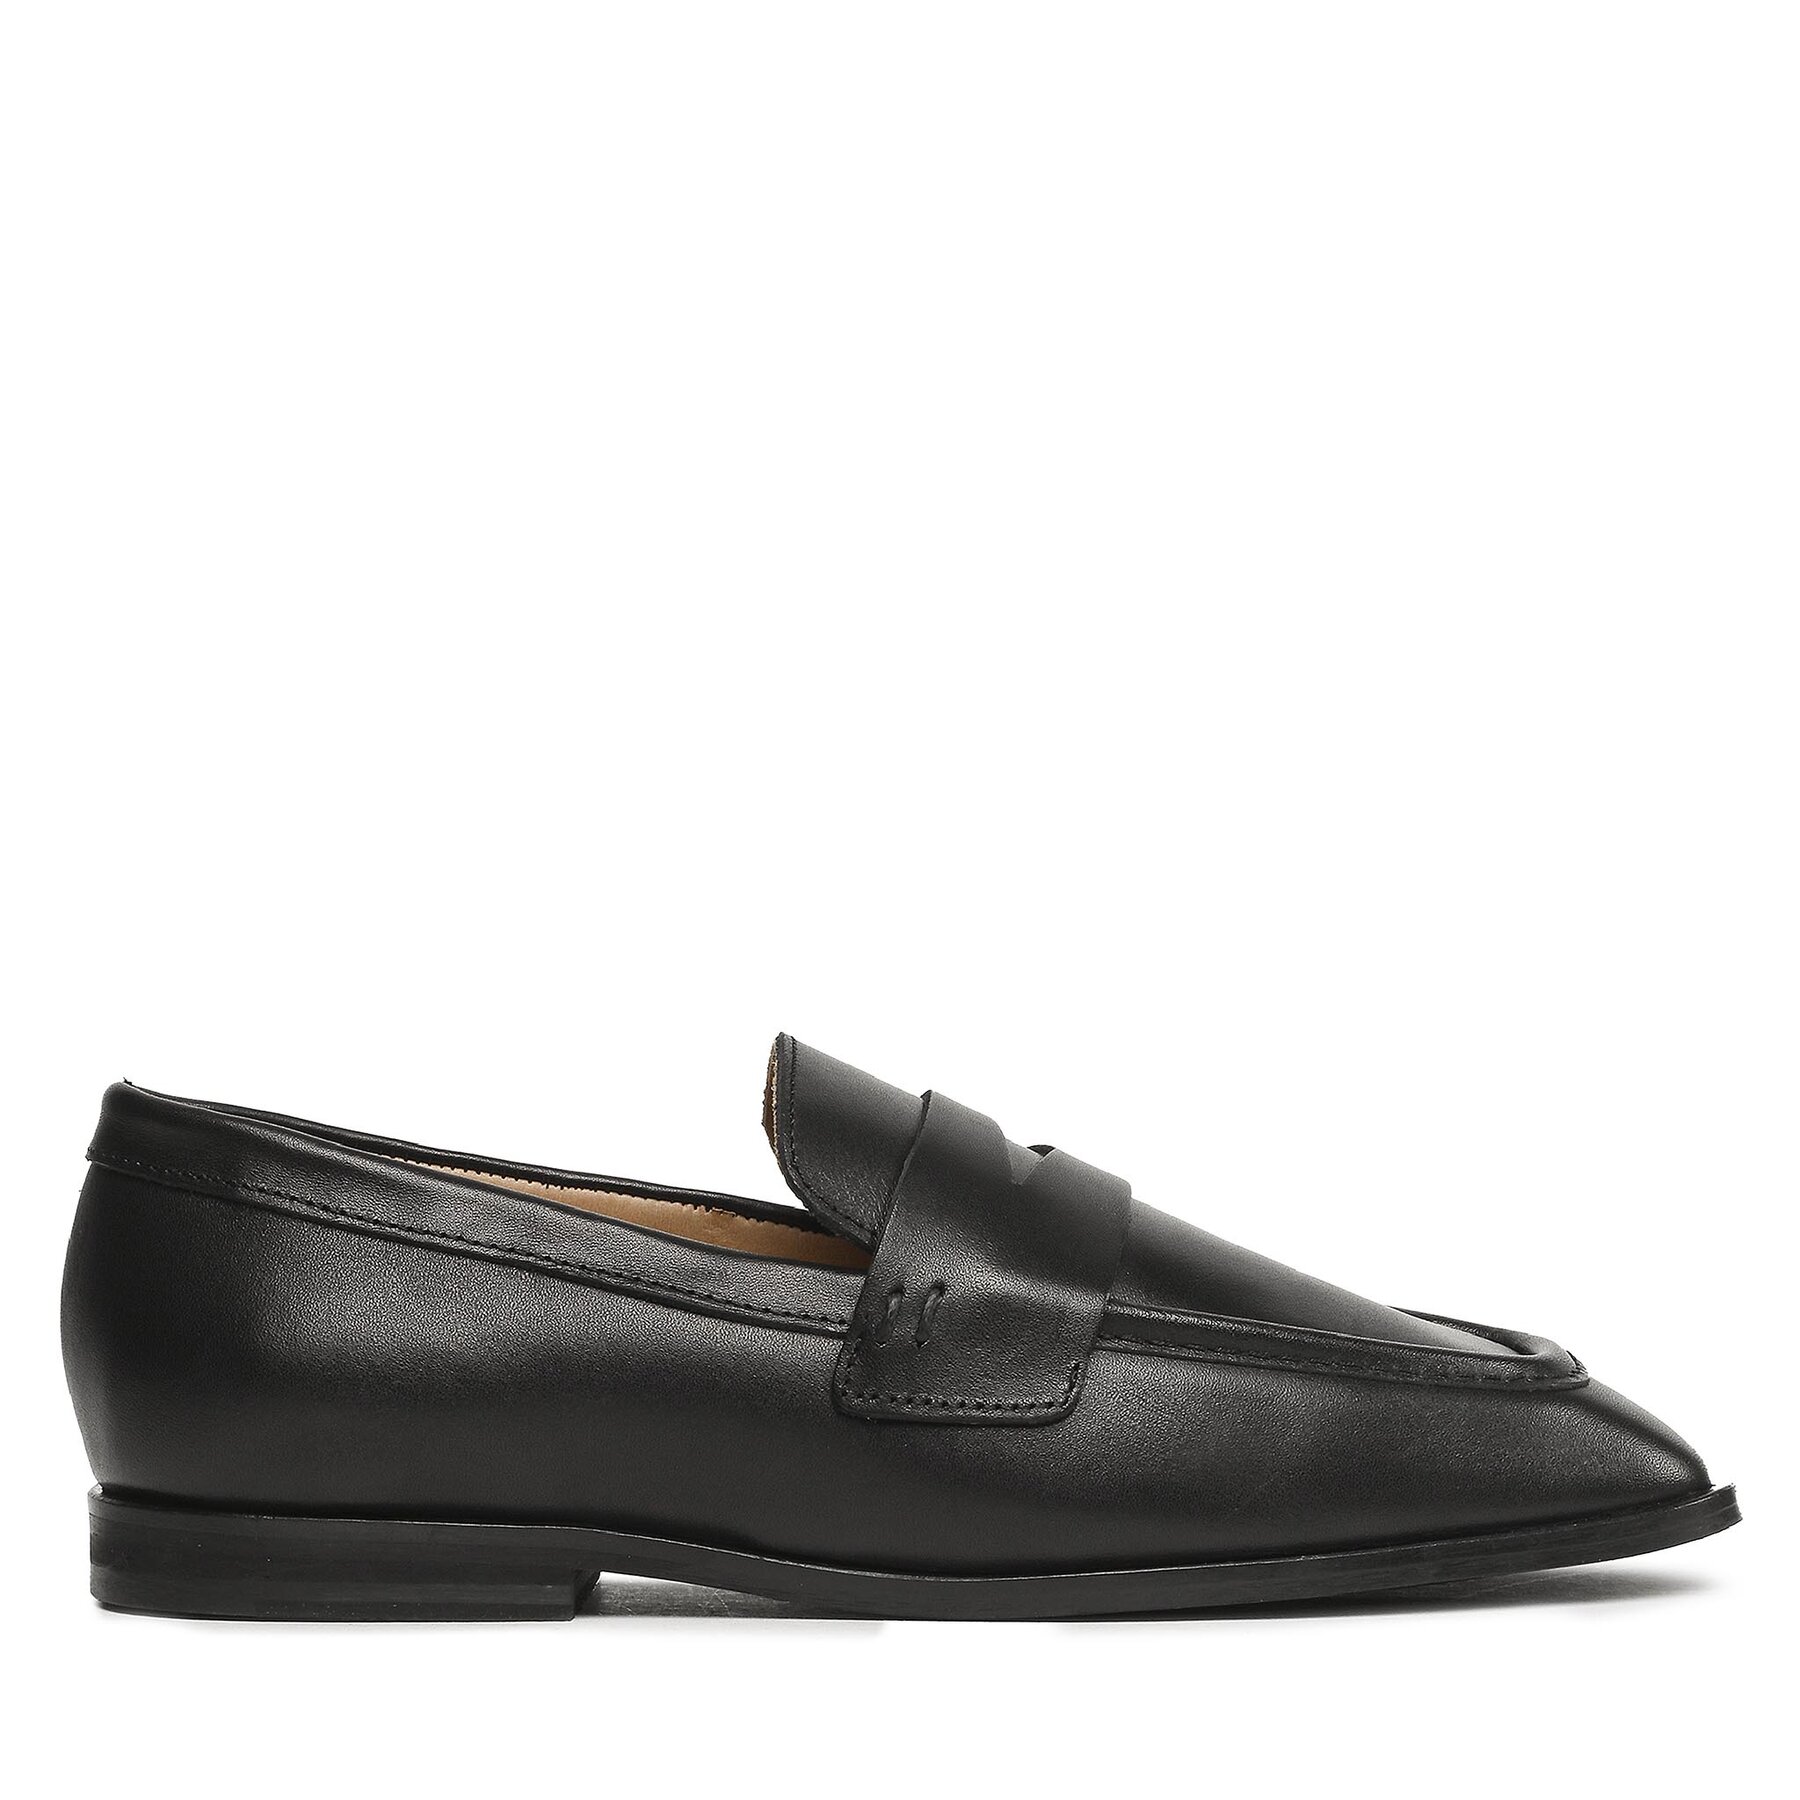 Loaferice Gino Rossi PENELOPE-01 Black